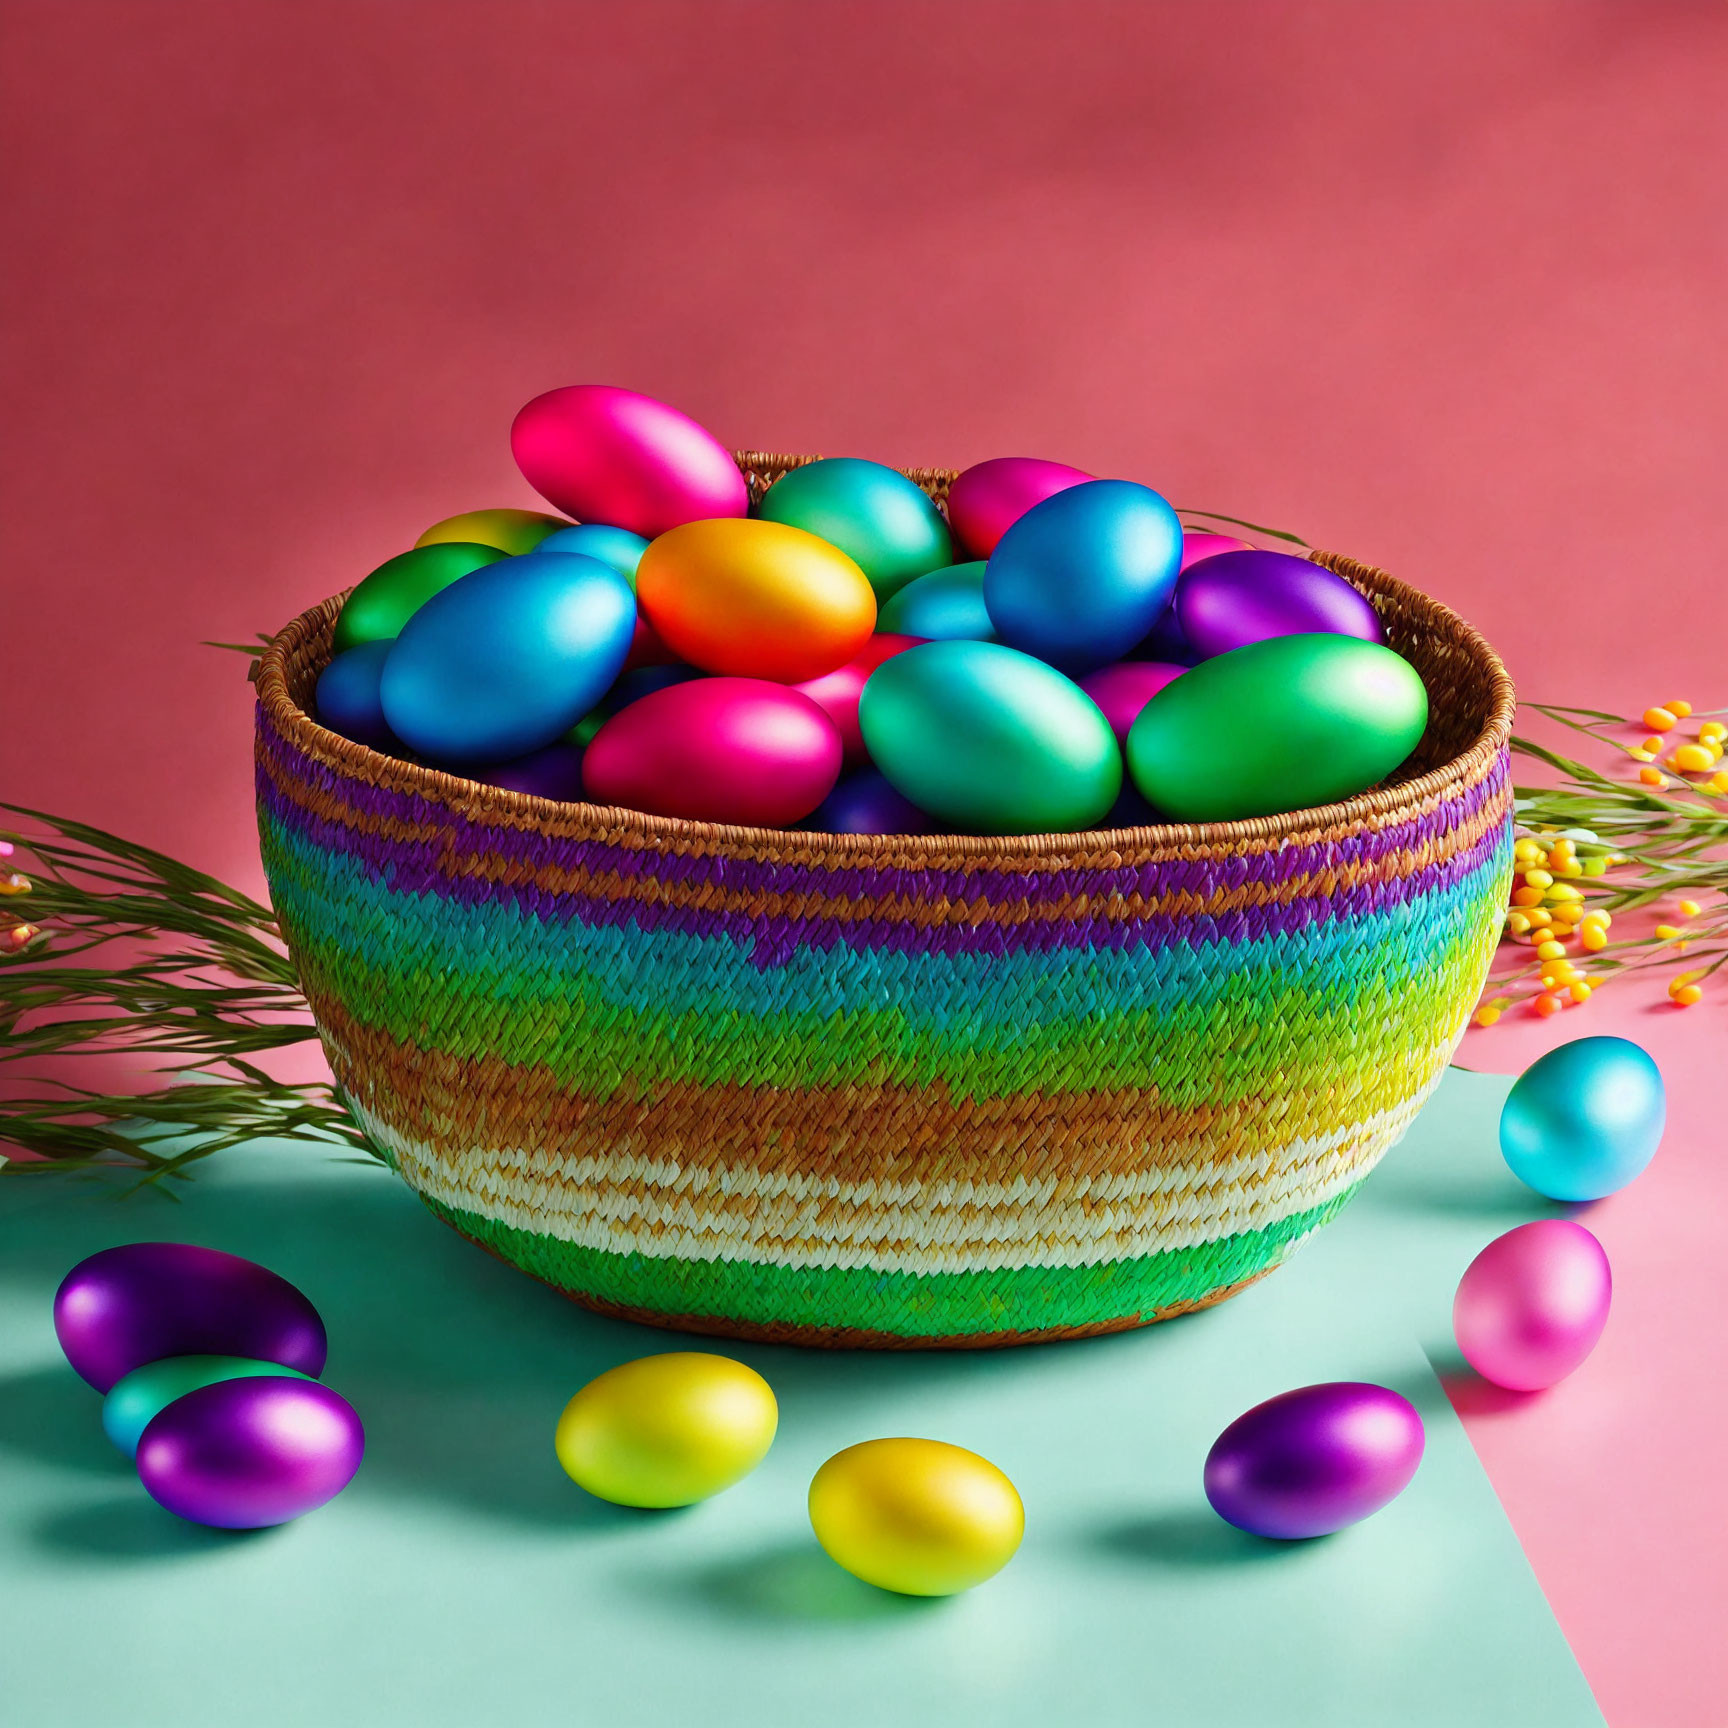 Colorful Easter egg basket on pink and blue background with scattered eggs and plants